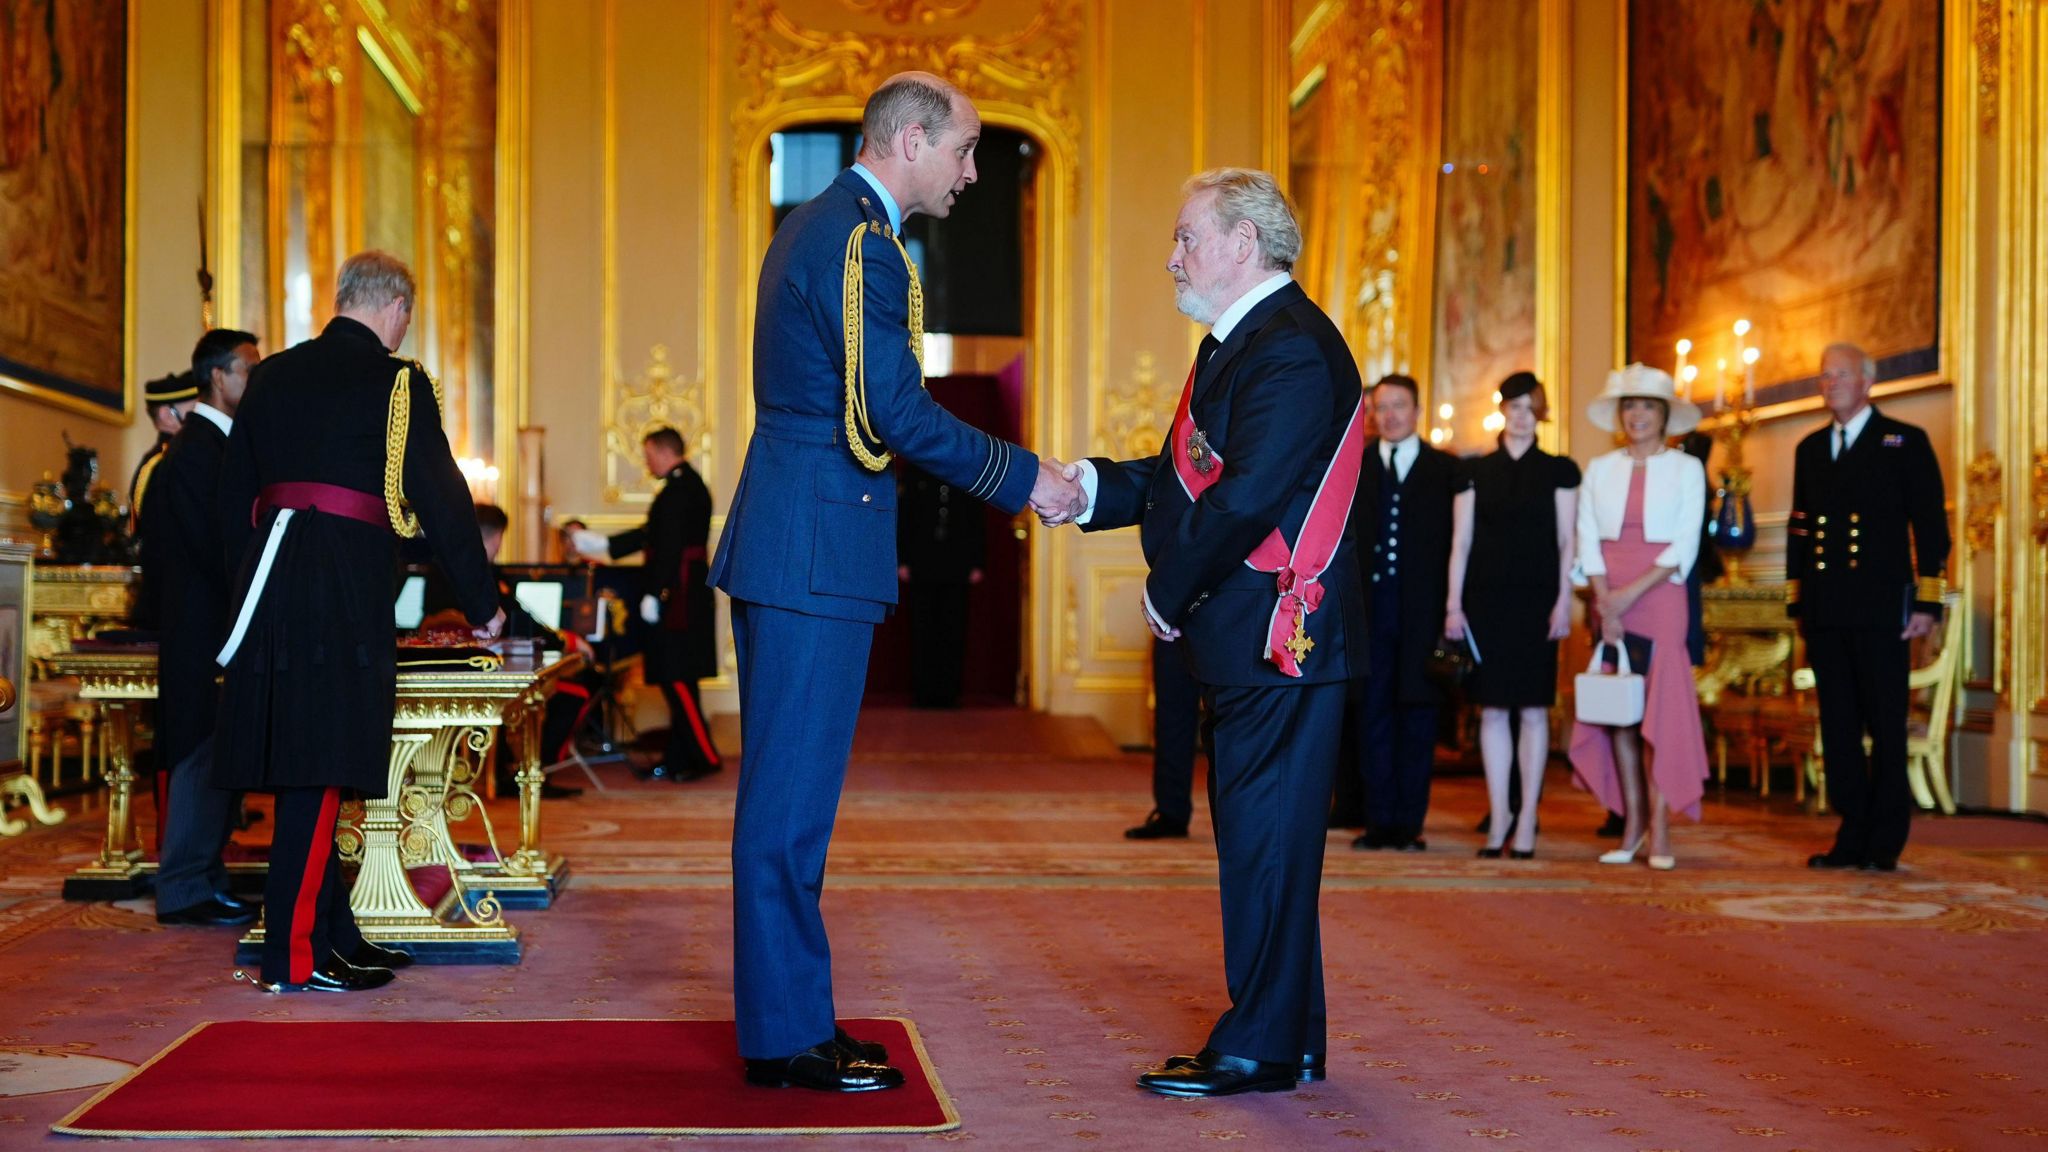 Sir Ridley shaking Prince William's hand